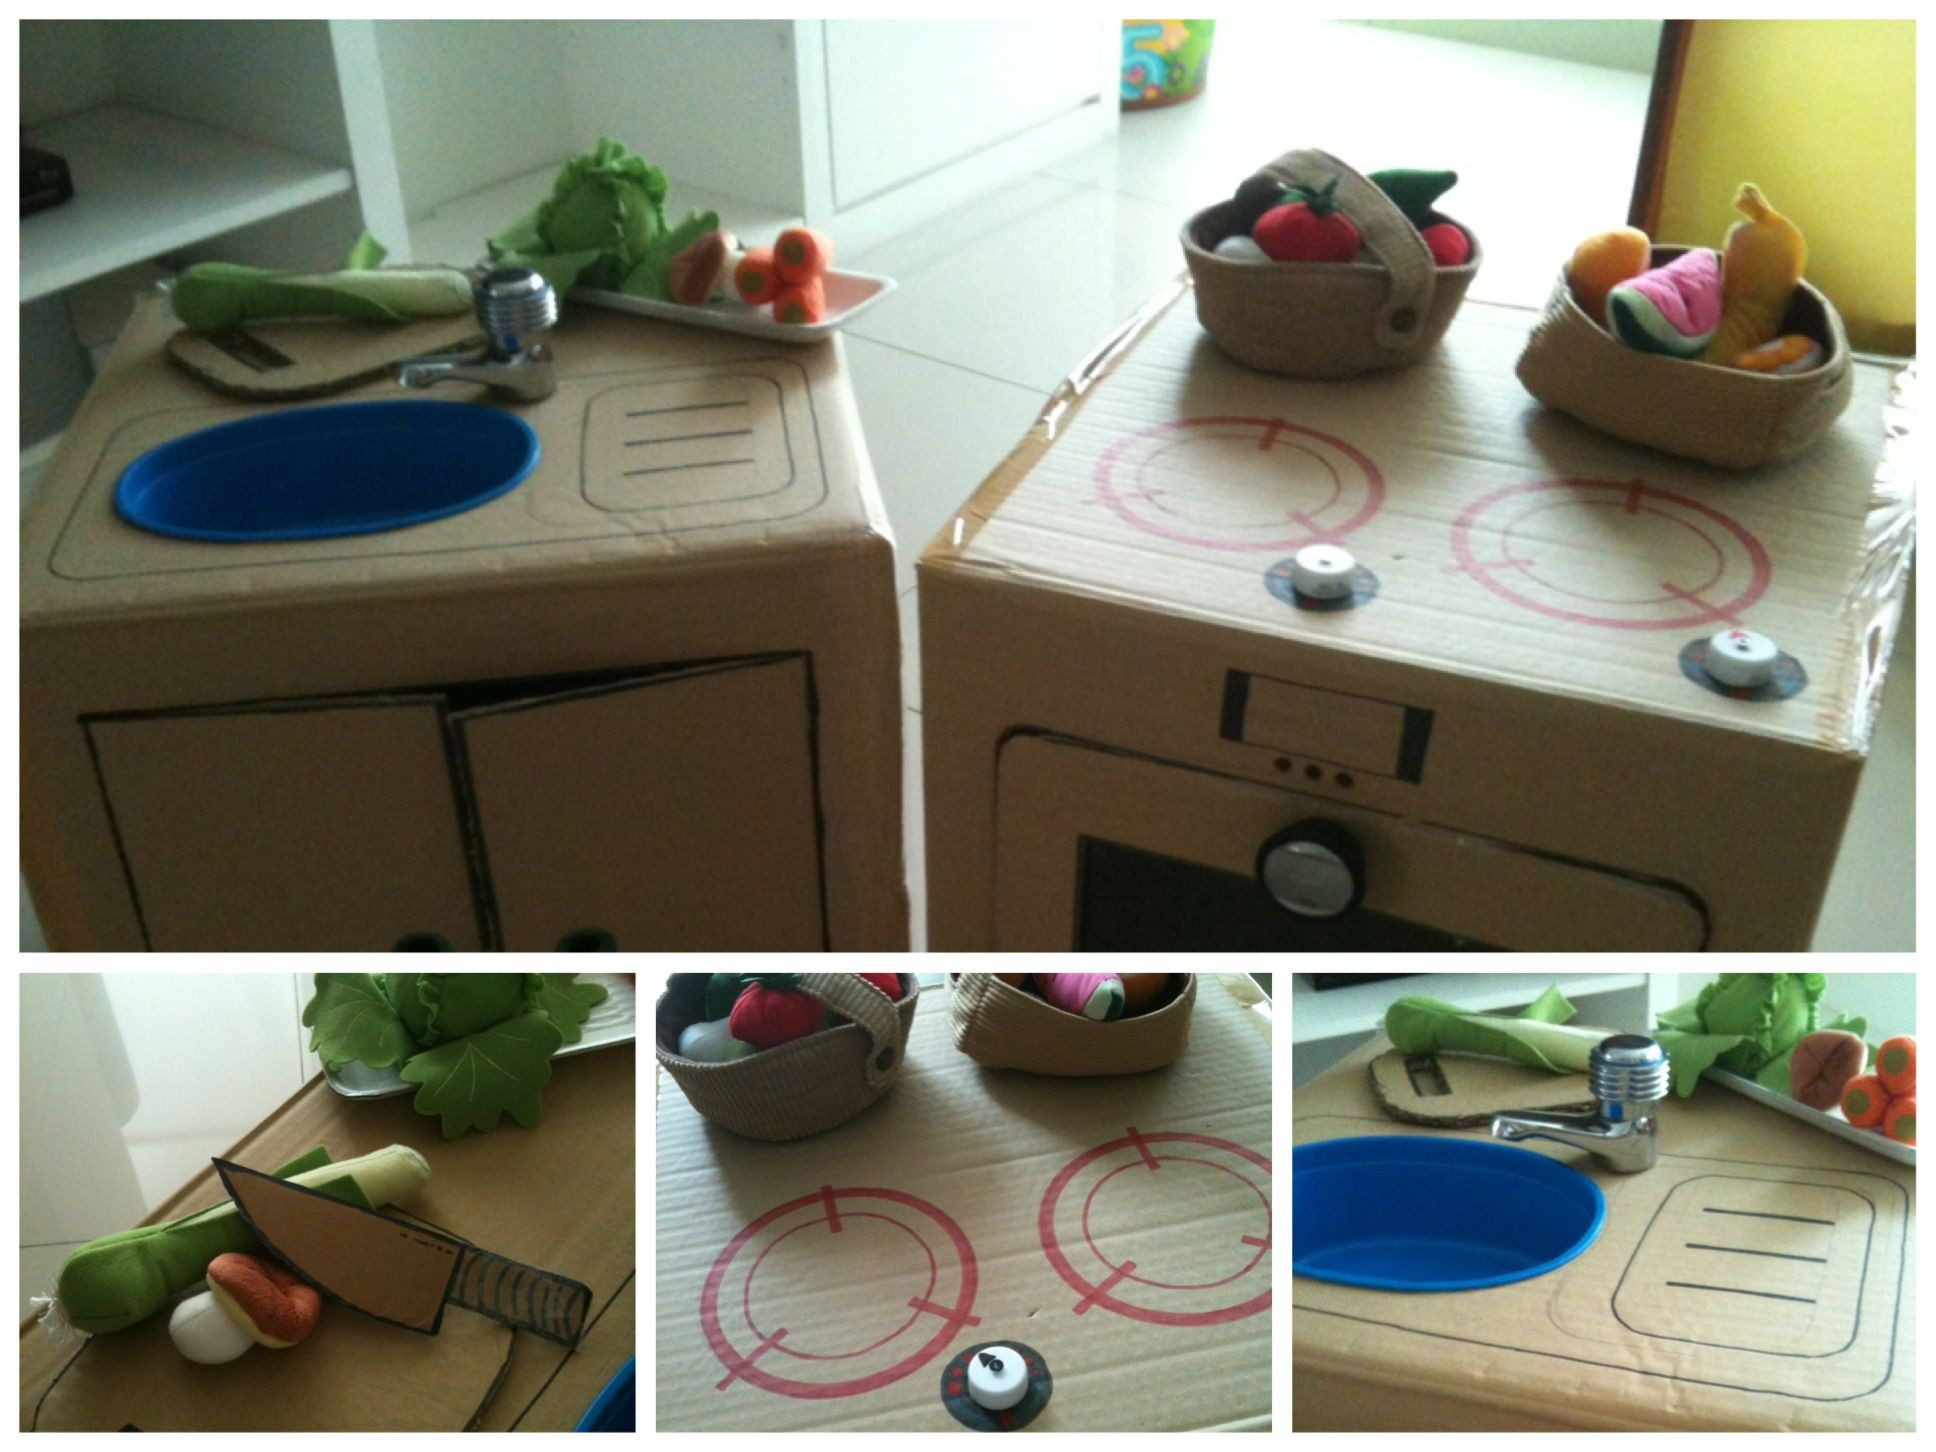 DIY Kids Kitchen Sets
 DIY cardboard kitchen set with IKEA toy ve ables and